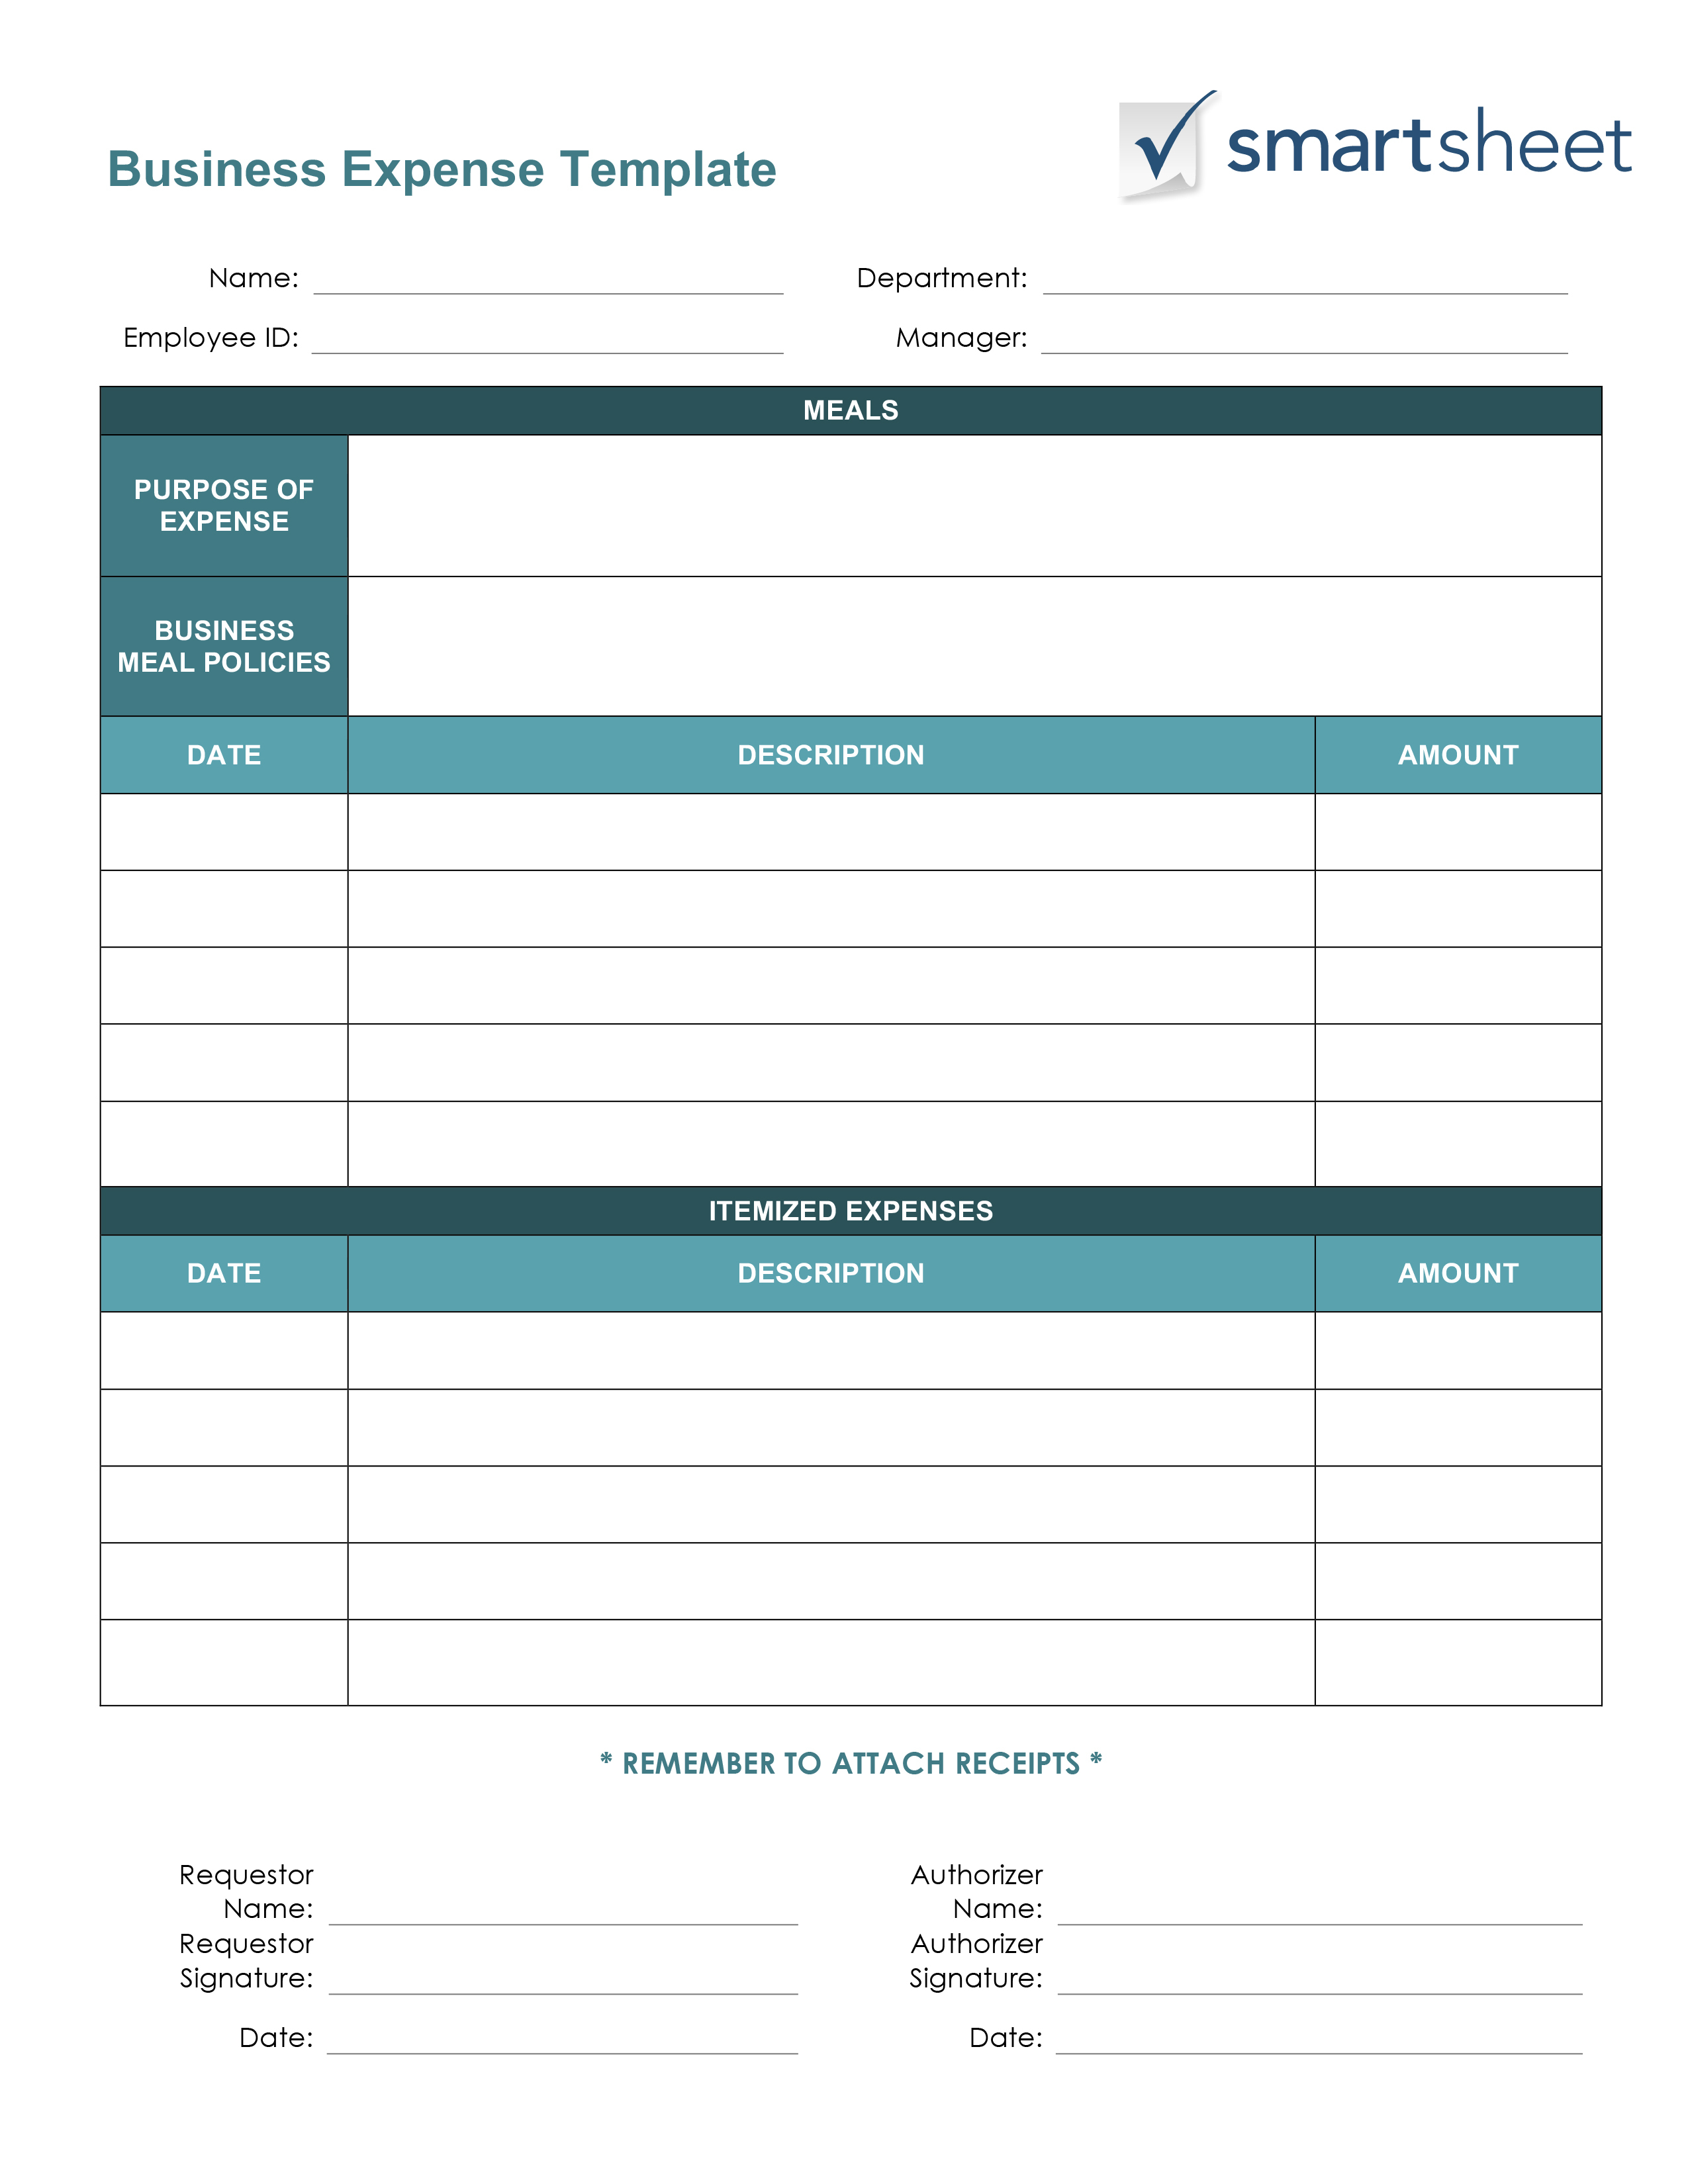 Free Expense Report Templates Smartsheet to Generic Expense Report